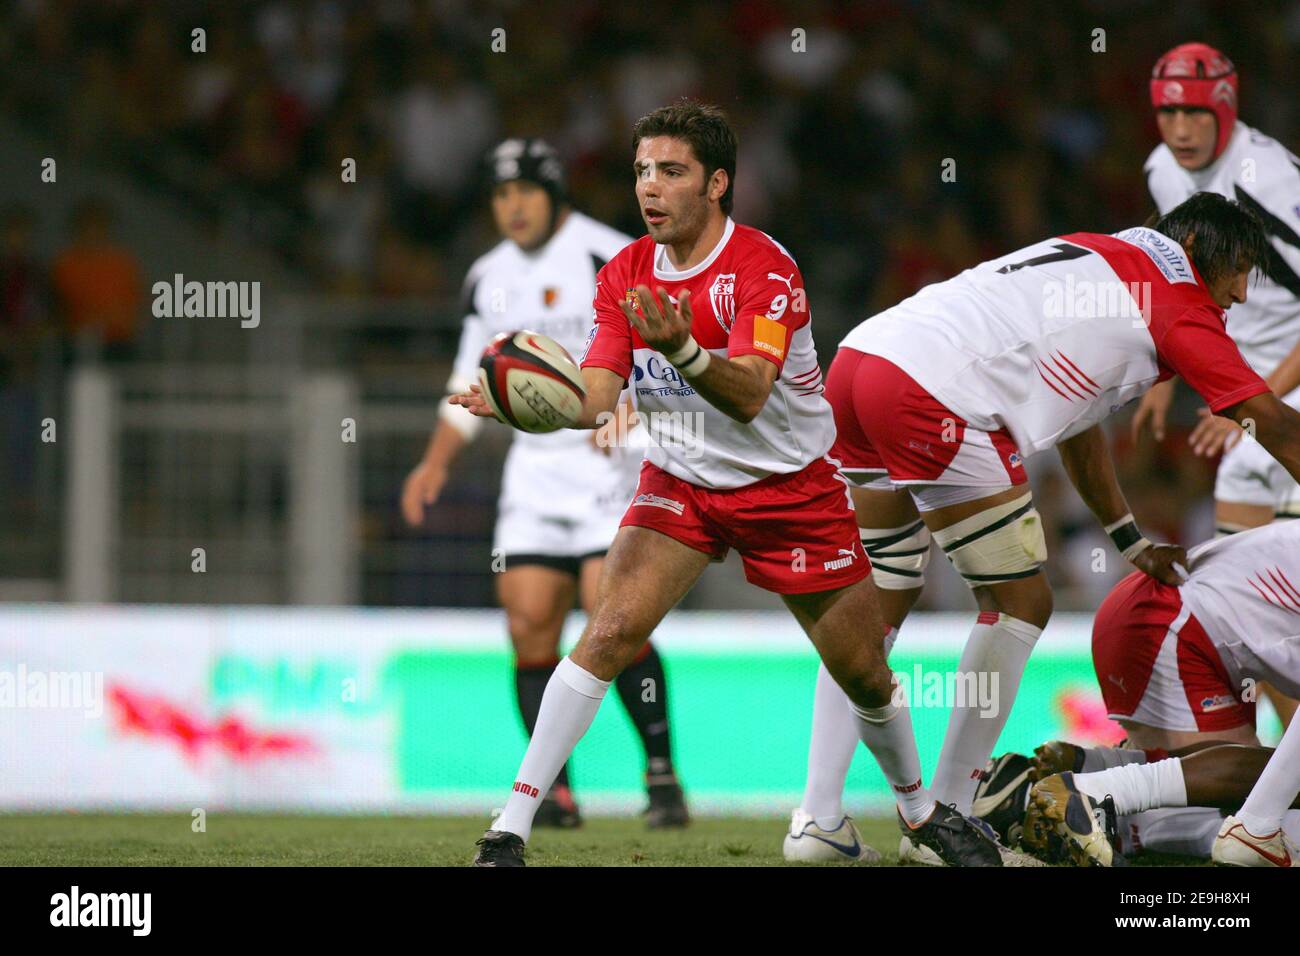 Biarritz Olympique's Dimitri Yachvili in action during the French Top 14  rugby Championship, Stade Toulousain vs Biarritz Olympique in Toulouse,  France, on September 3, 2006. Toulouse won 20-3. Photo by Manuel  Blondeau/Cameleon/ABACAPRESS.COM